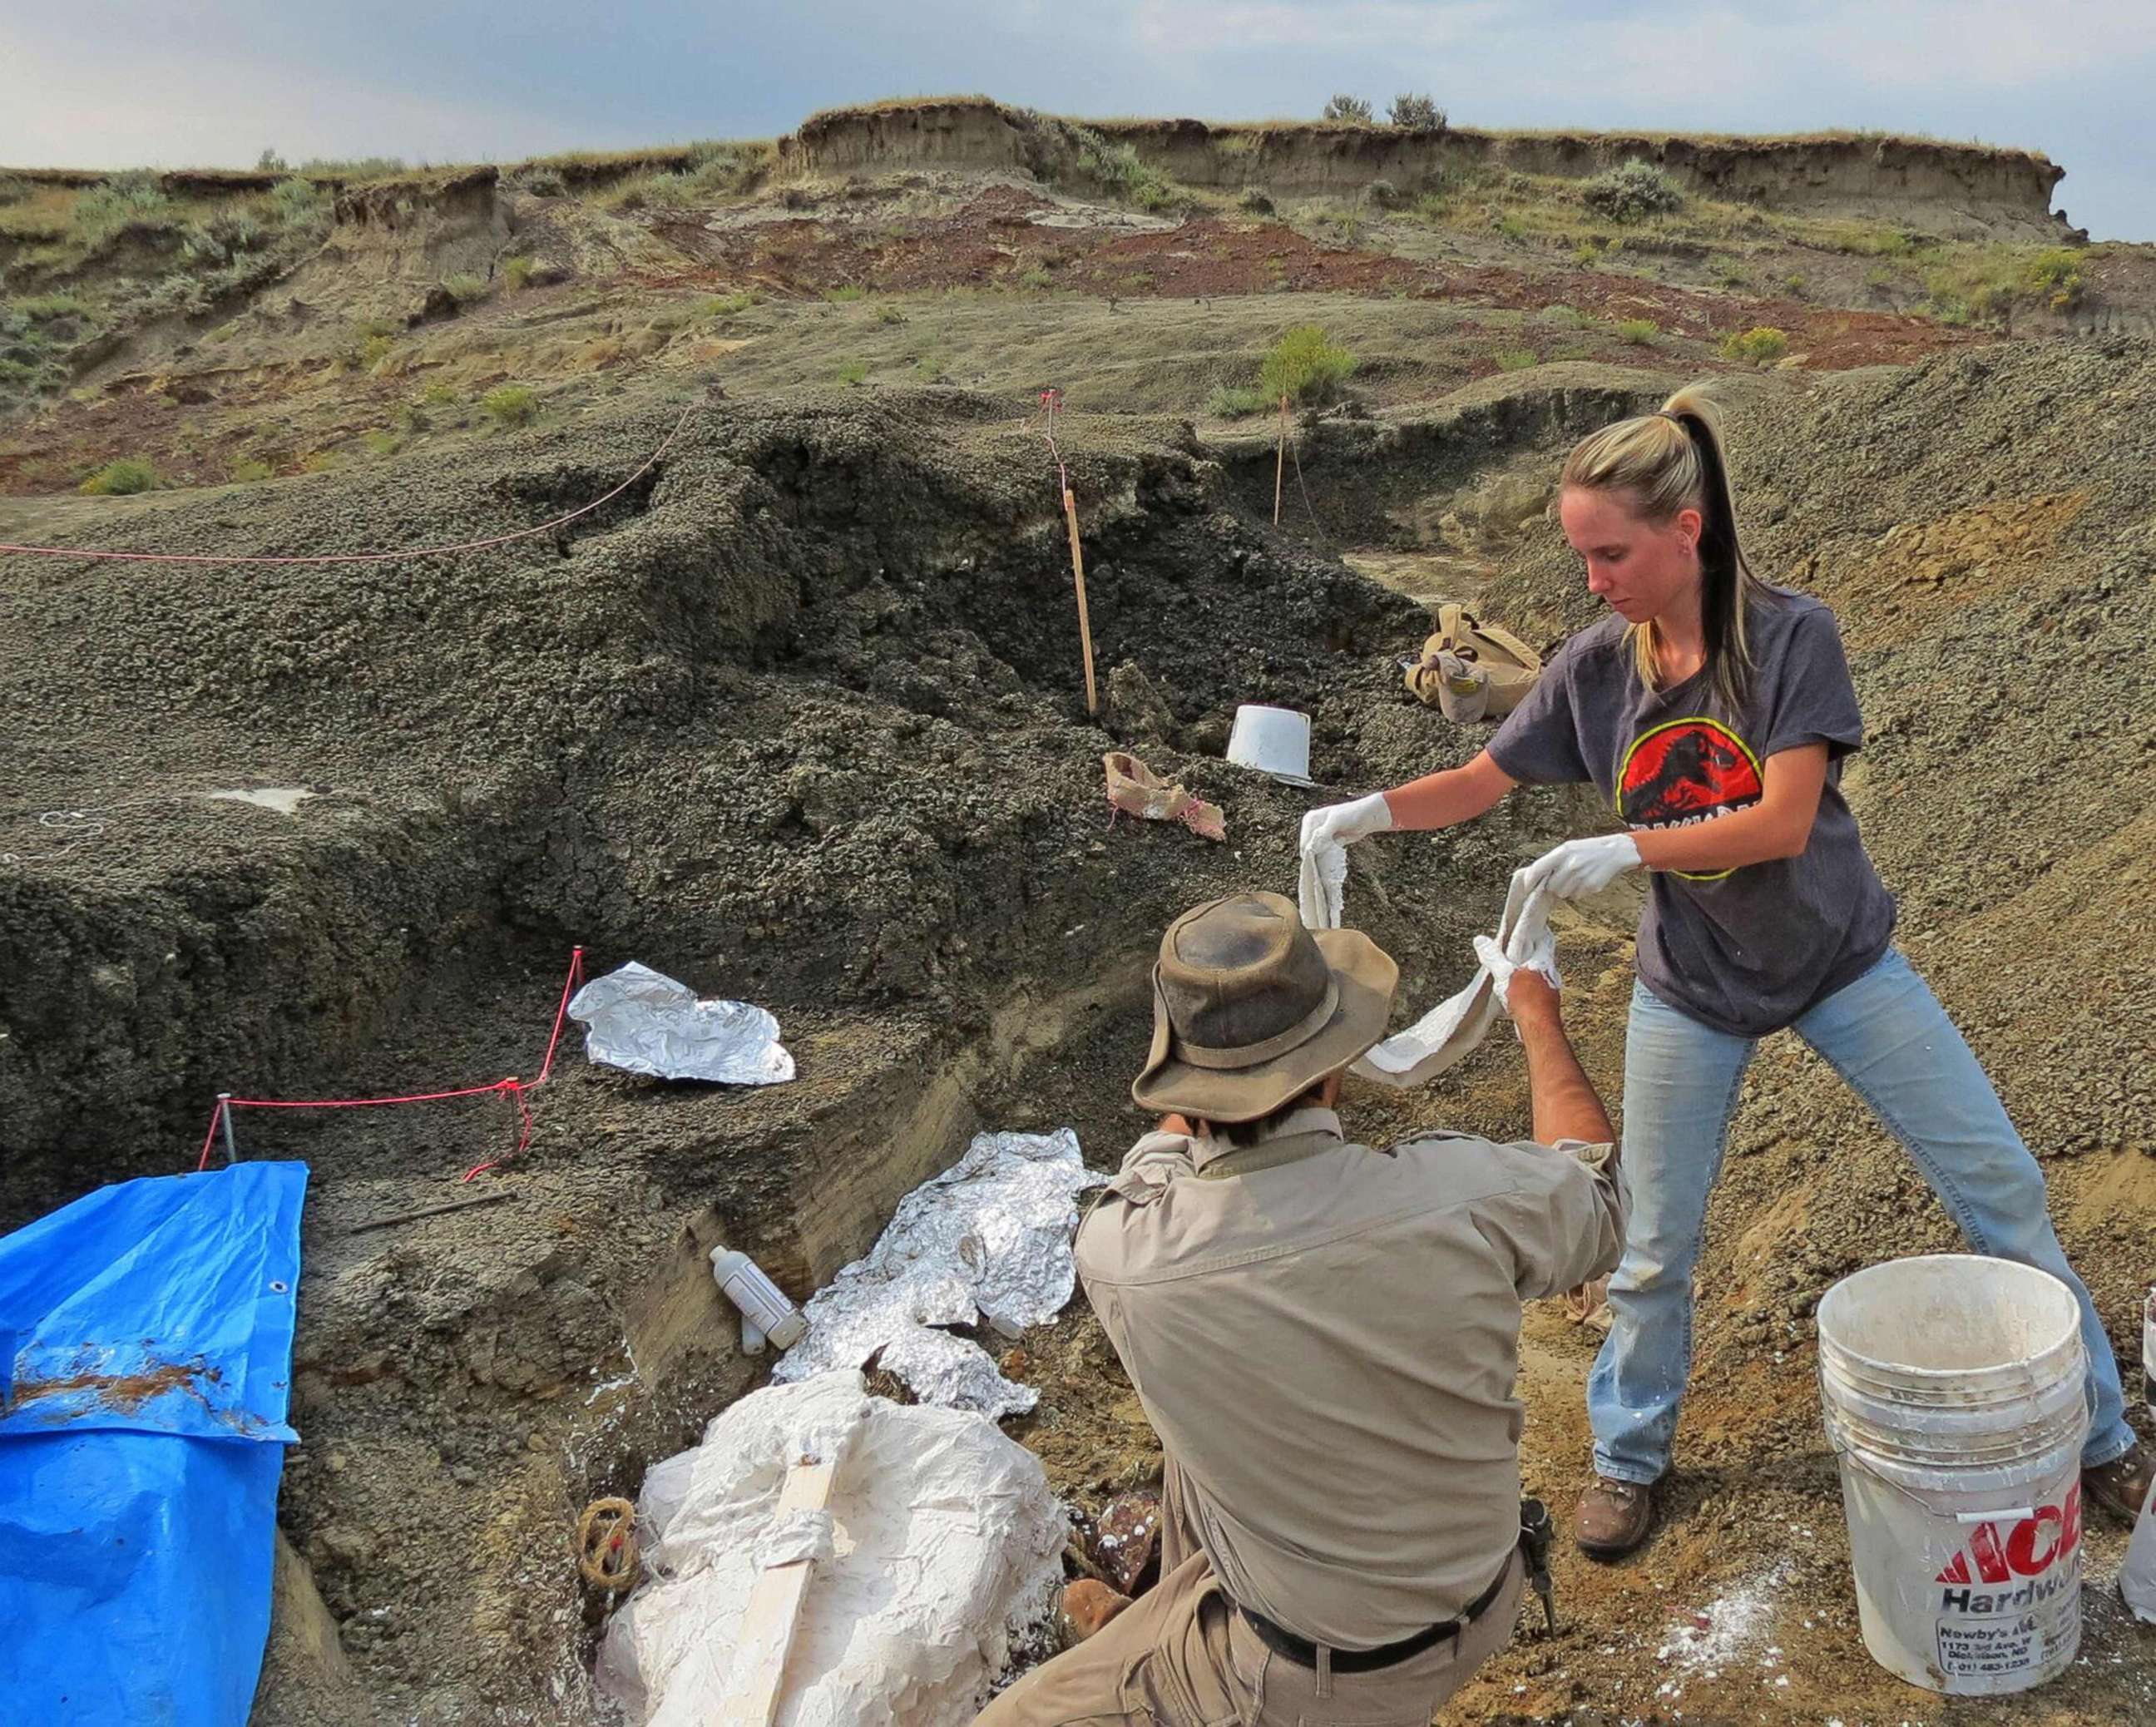 PHOTO: The University of Kansas' Robert DePalma(L)and field assistant Kylie Ruble(R) excavate fossil carcasses from the Tanis deposit, March 29, 2019.